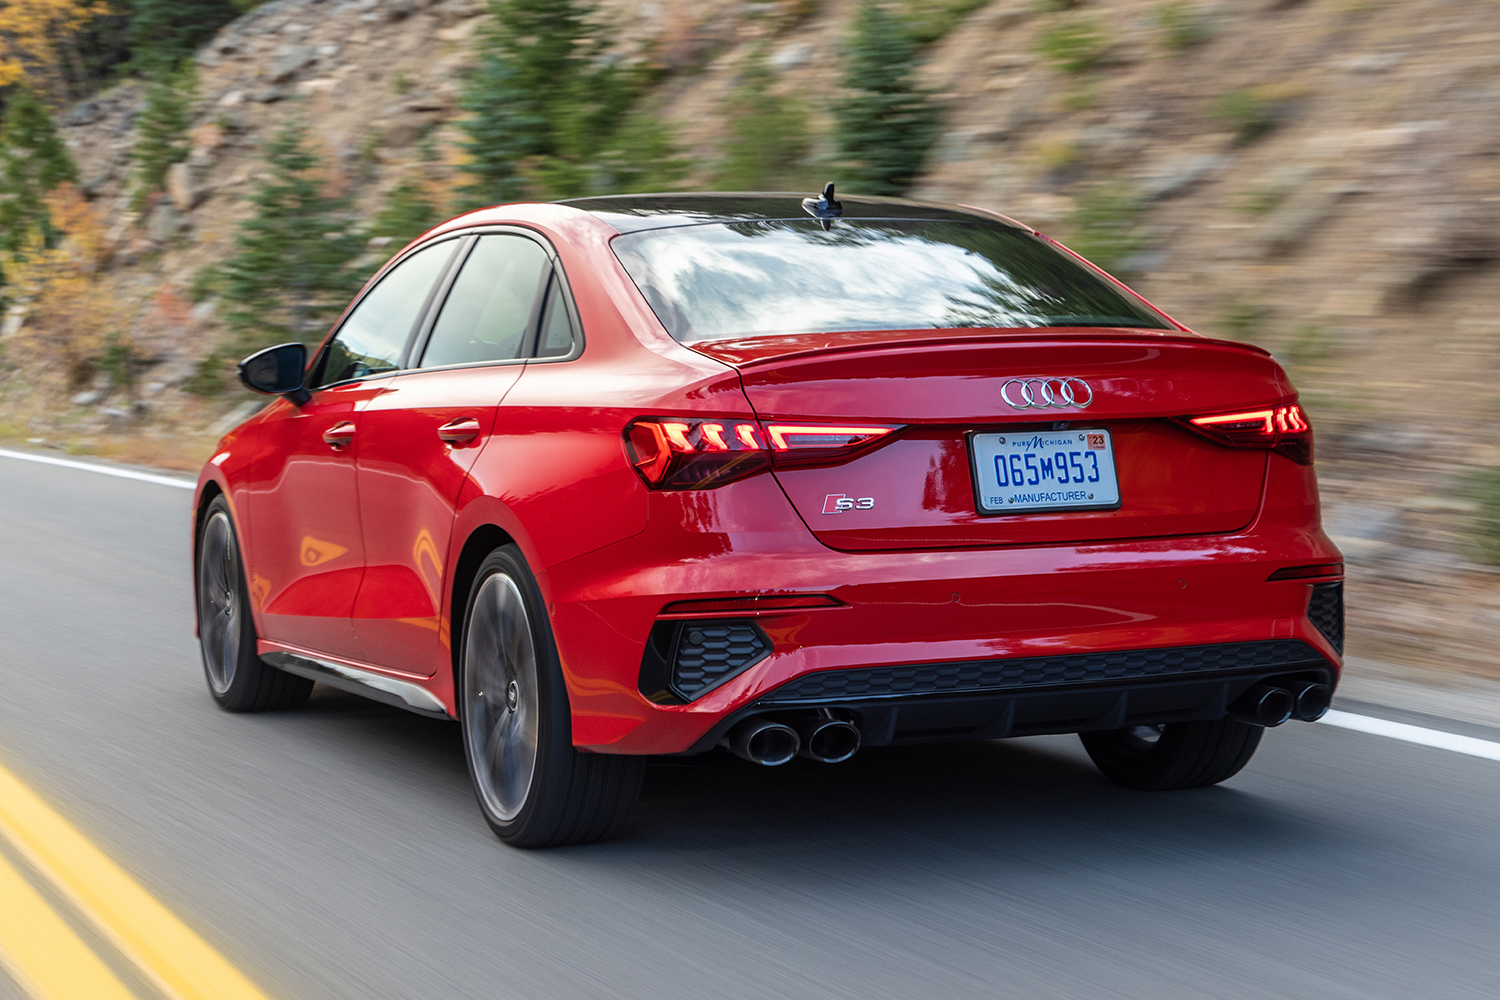 Review: Skip the Crossover, Consider the 2022 Audi S3 - InsideHook